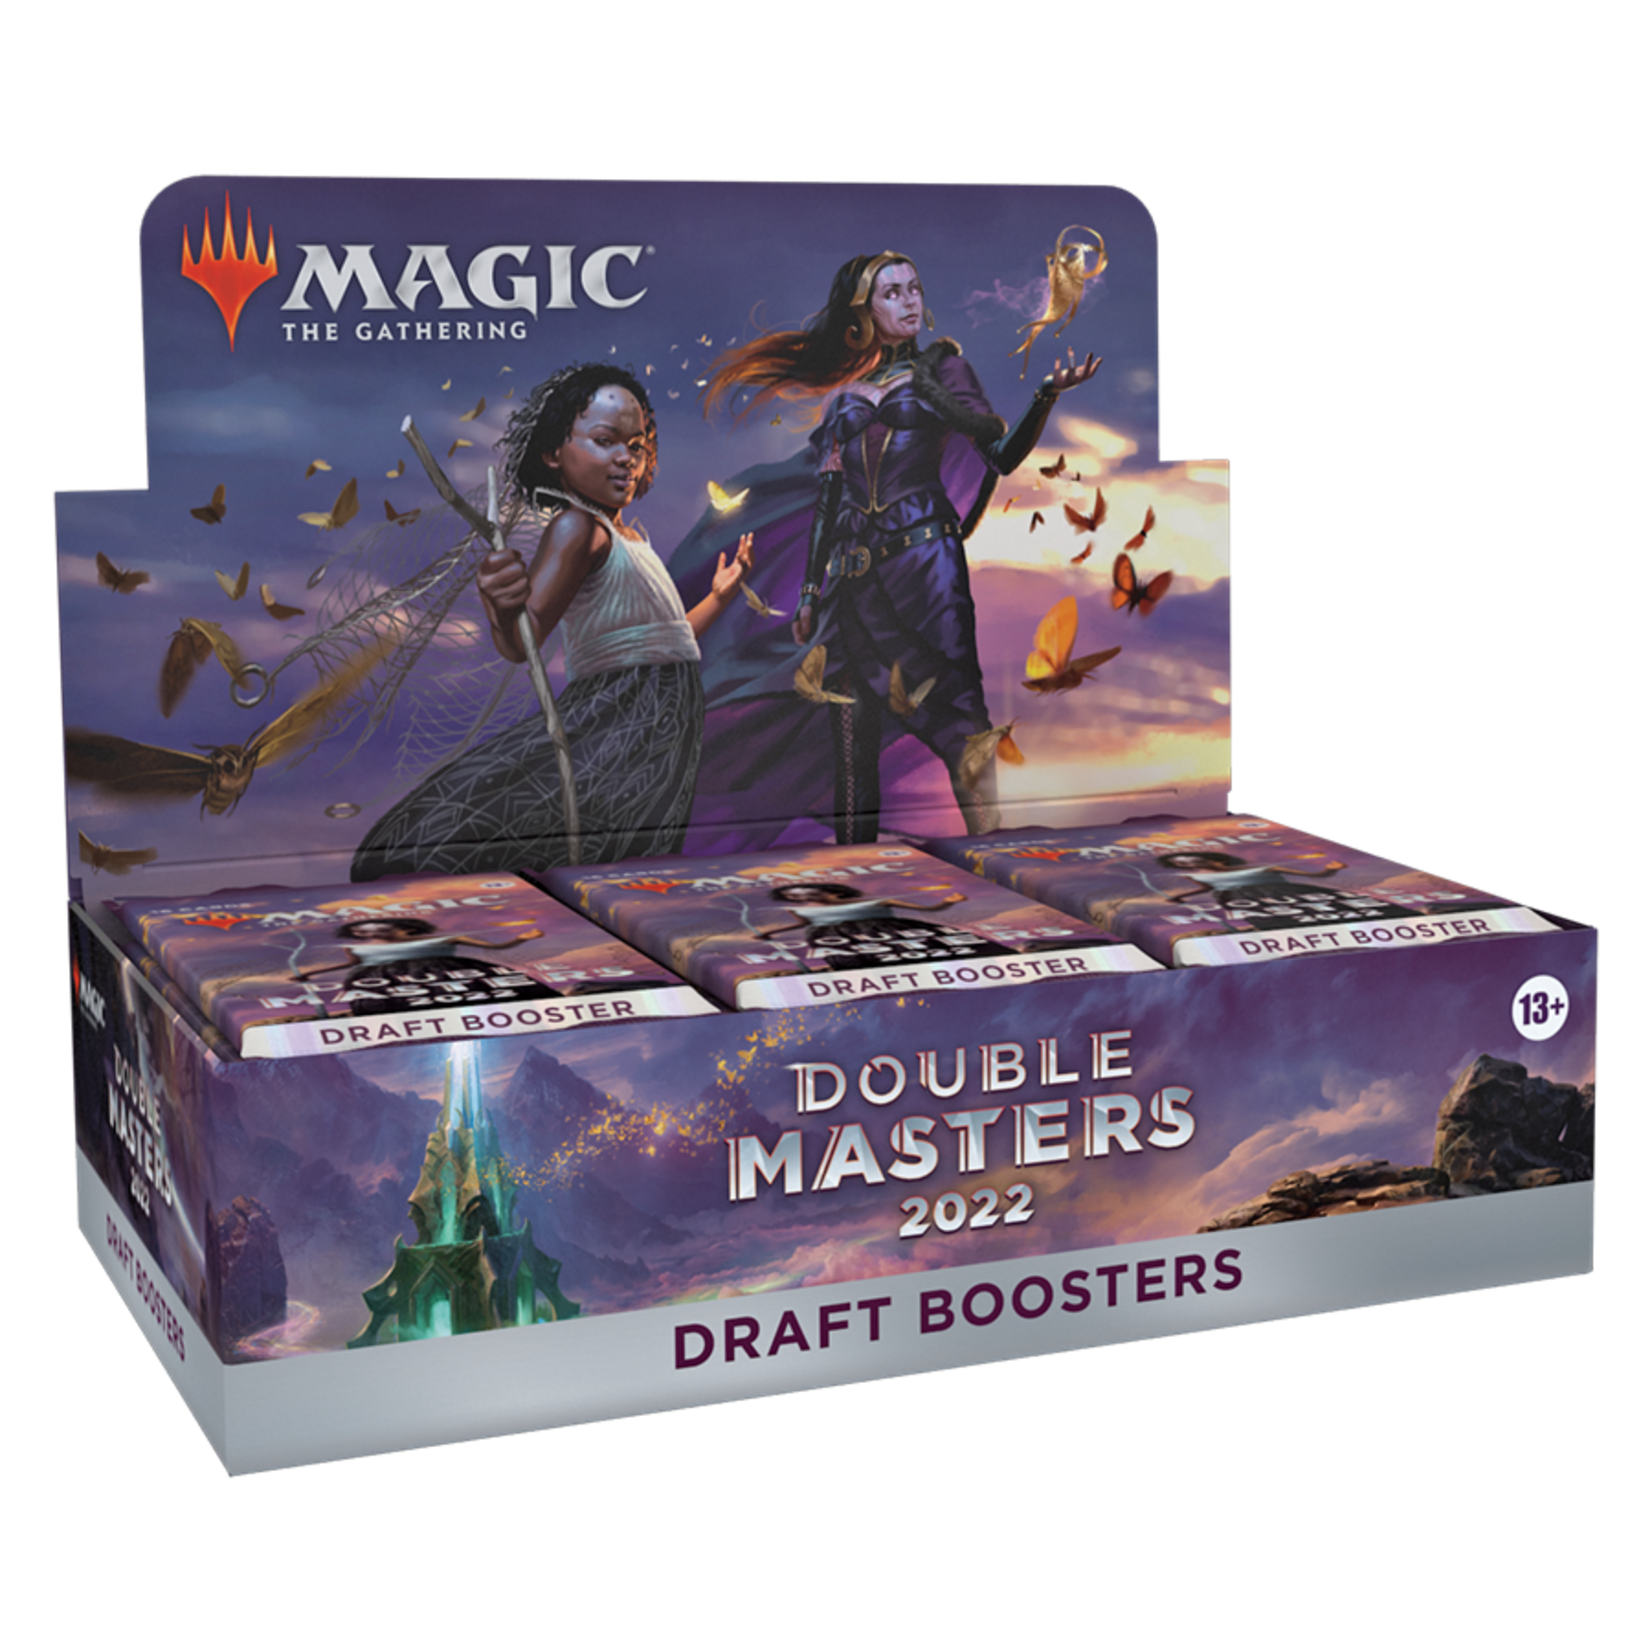 Magic: The Gathering Magic: The Gathering – Double Masters, Draft Booster Box (2022)